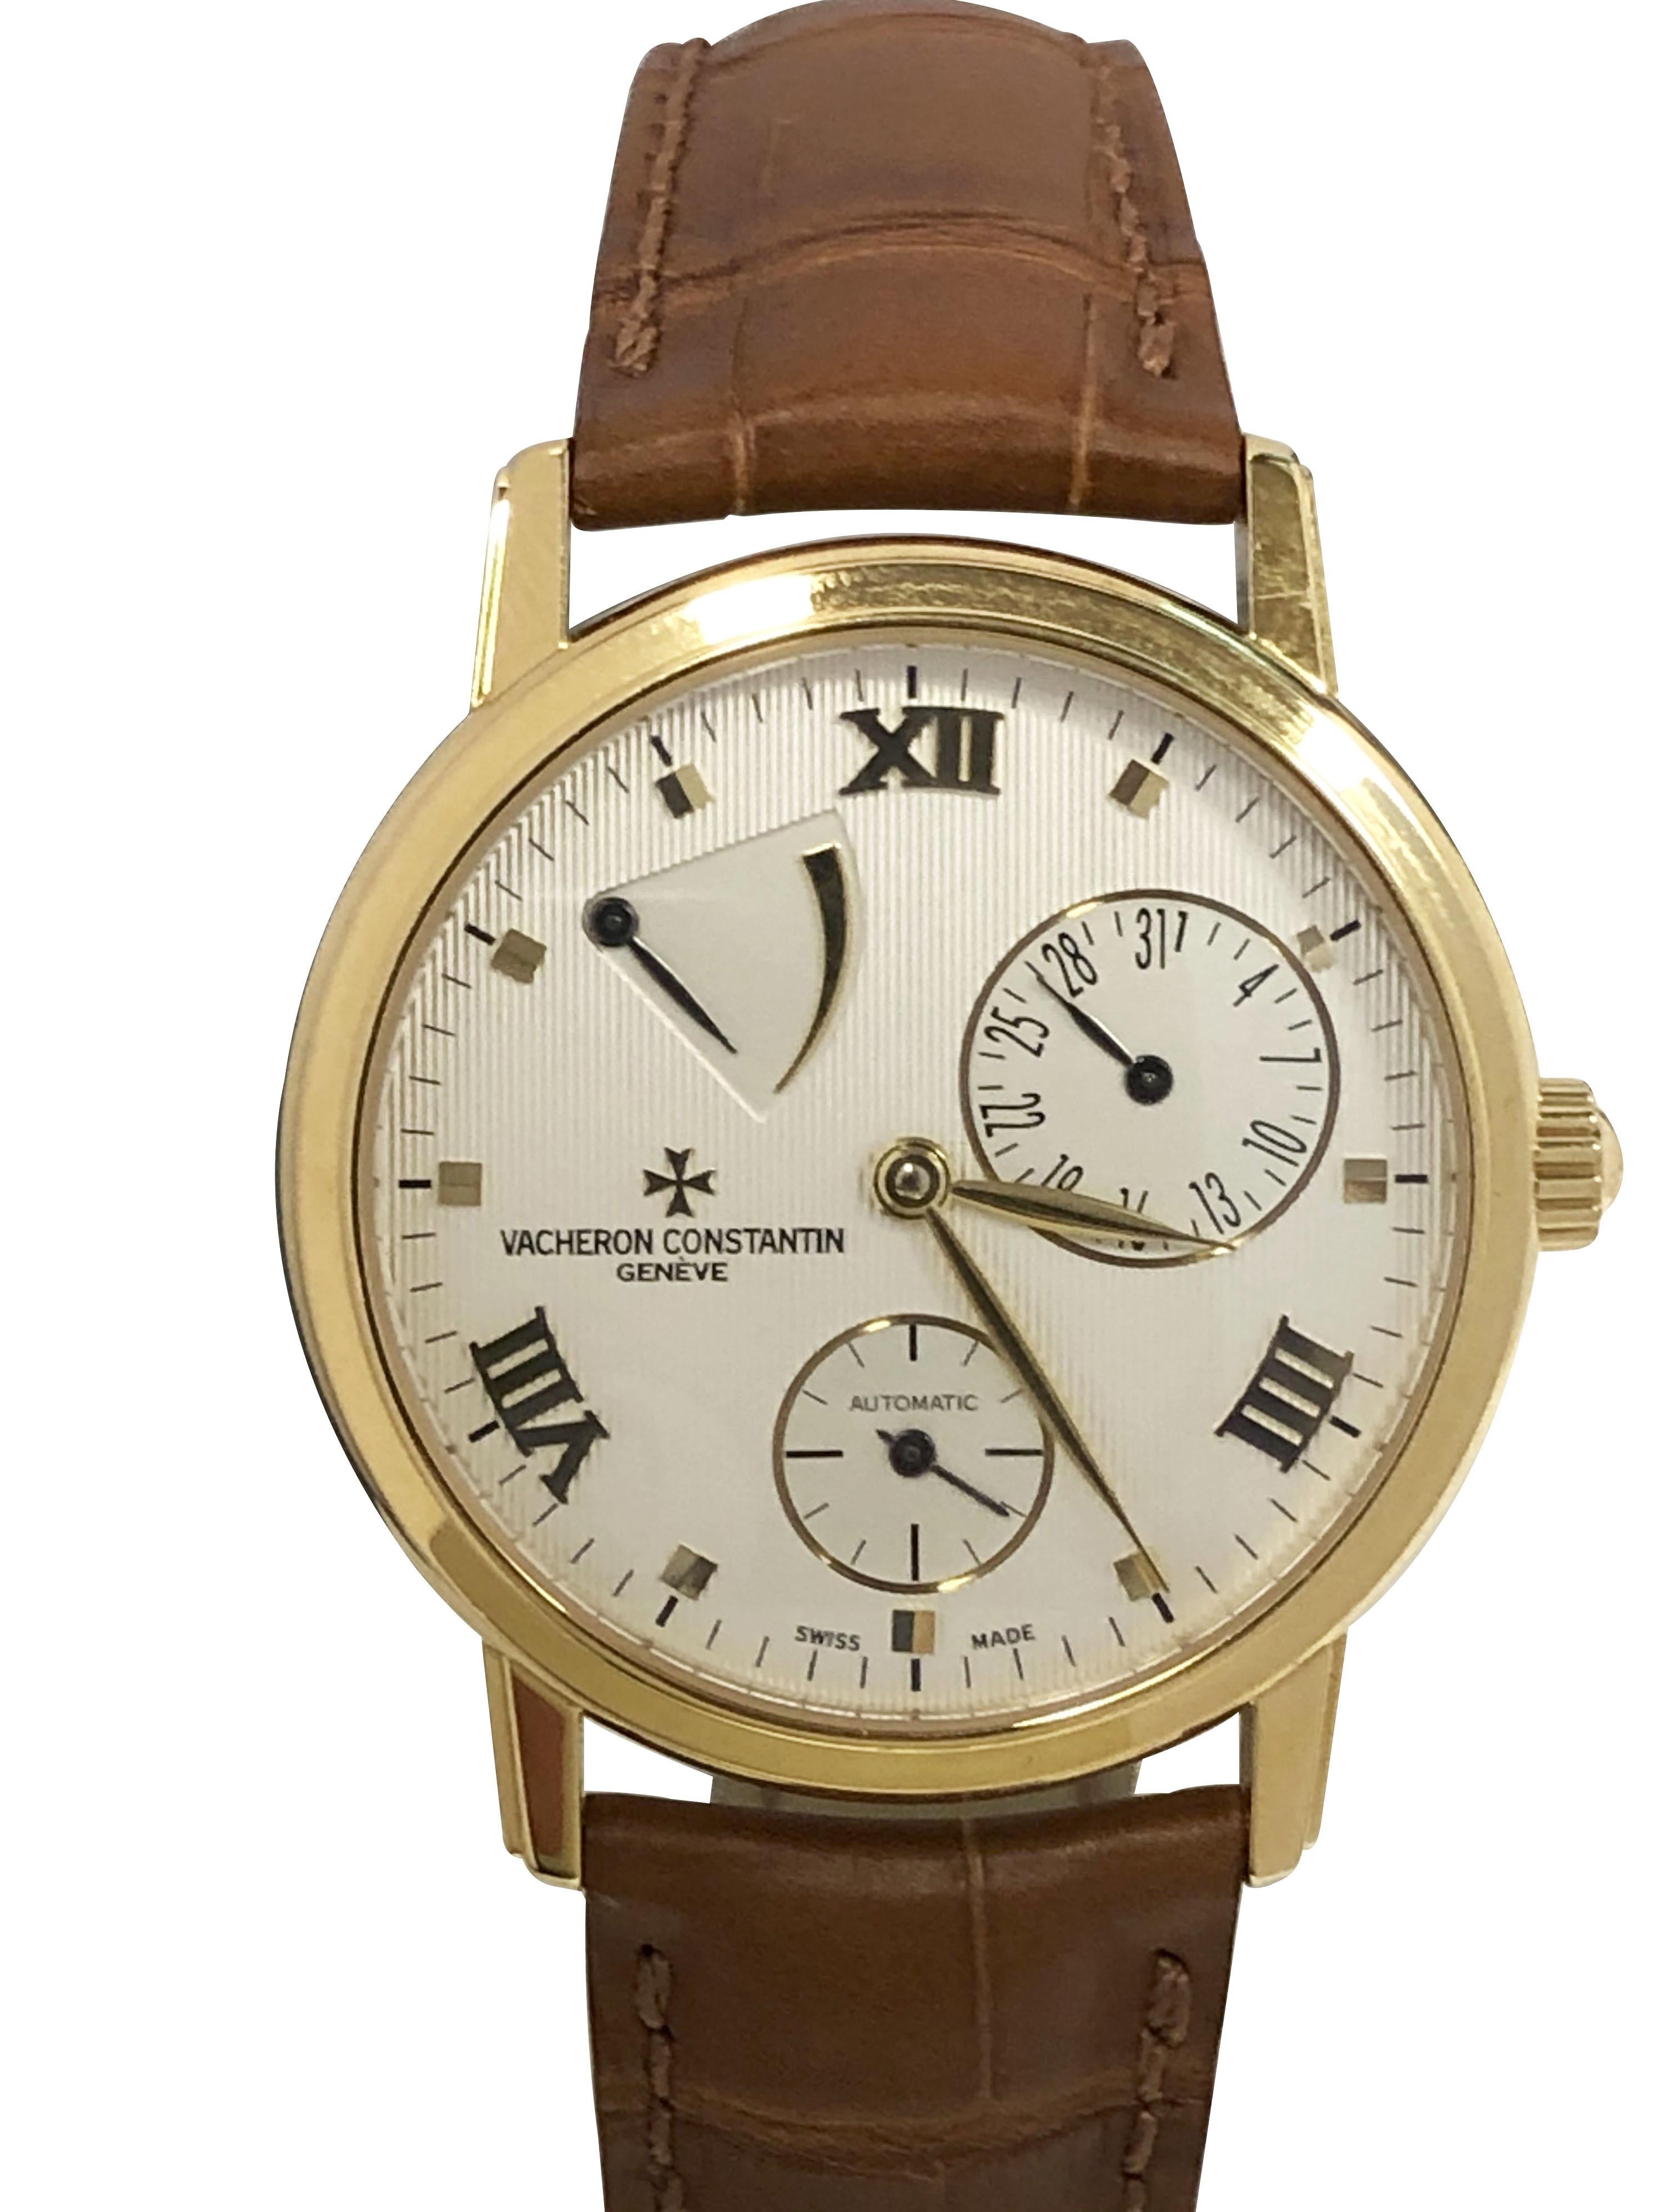 Vacheron Constantin Patrimony Power Reserve Automatic Yellow Gold Wrist Watch In Excellent Condition For Sale In Chicago, IL